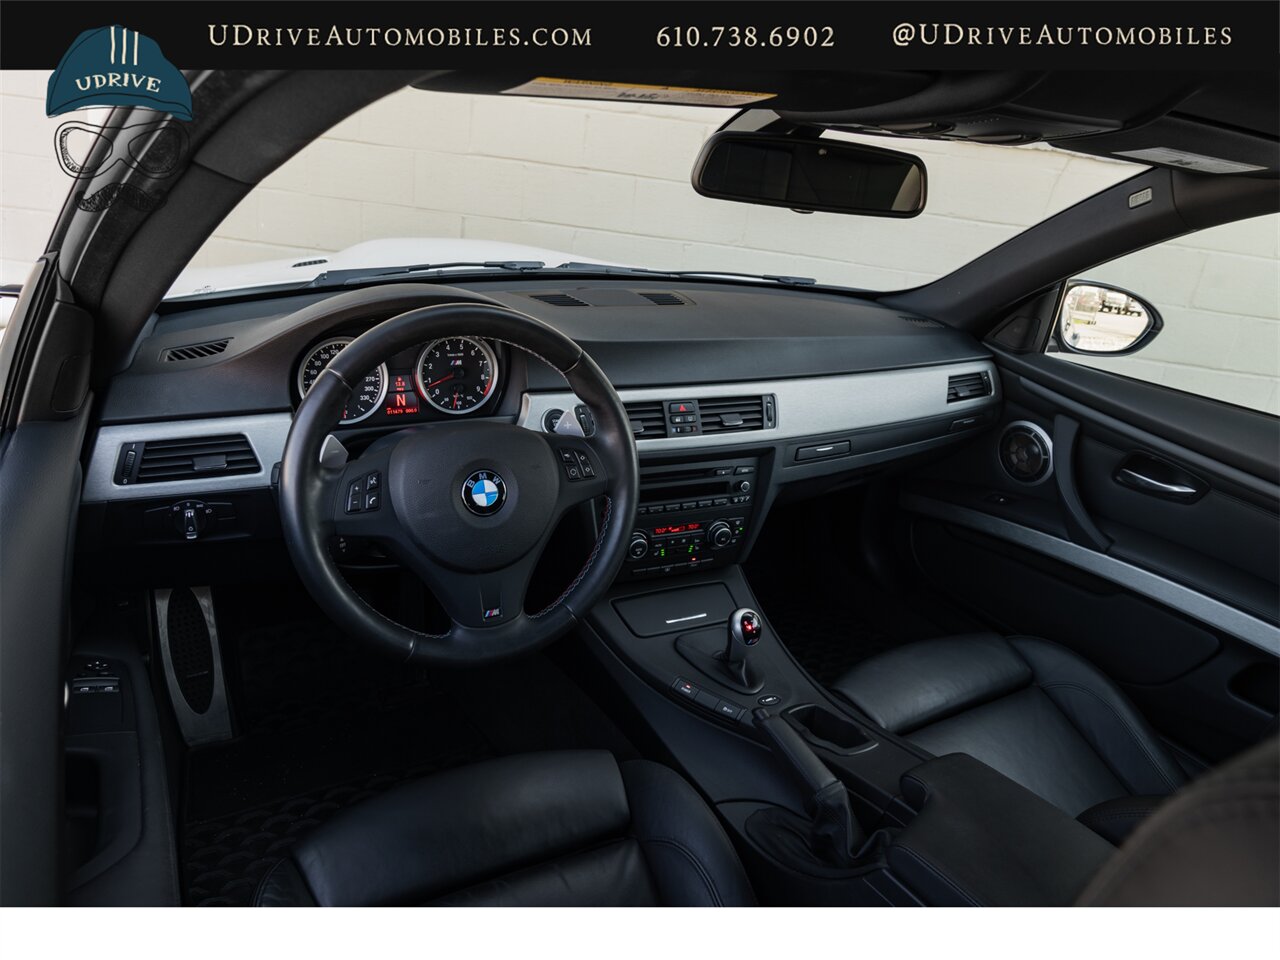 2011 BMW M3  No Nav Carbon Roof Comf Acc 19in Whls 11k Miles - Photo 5 - West Chester, PA 19382